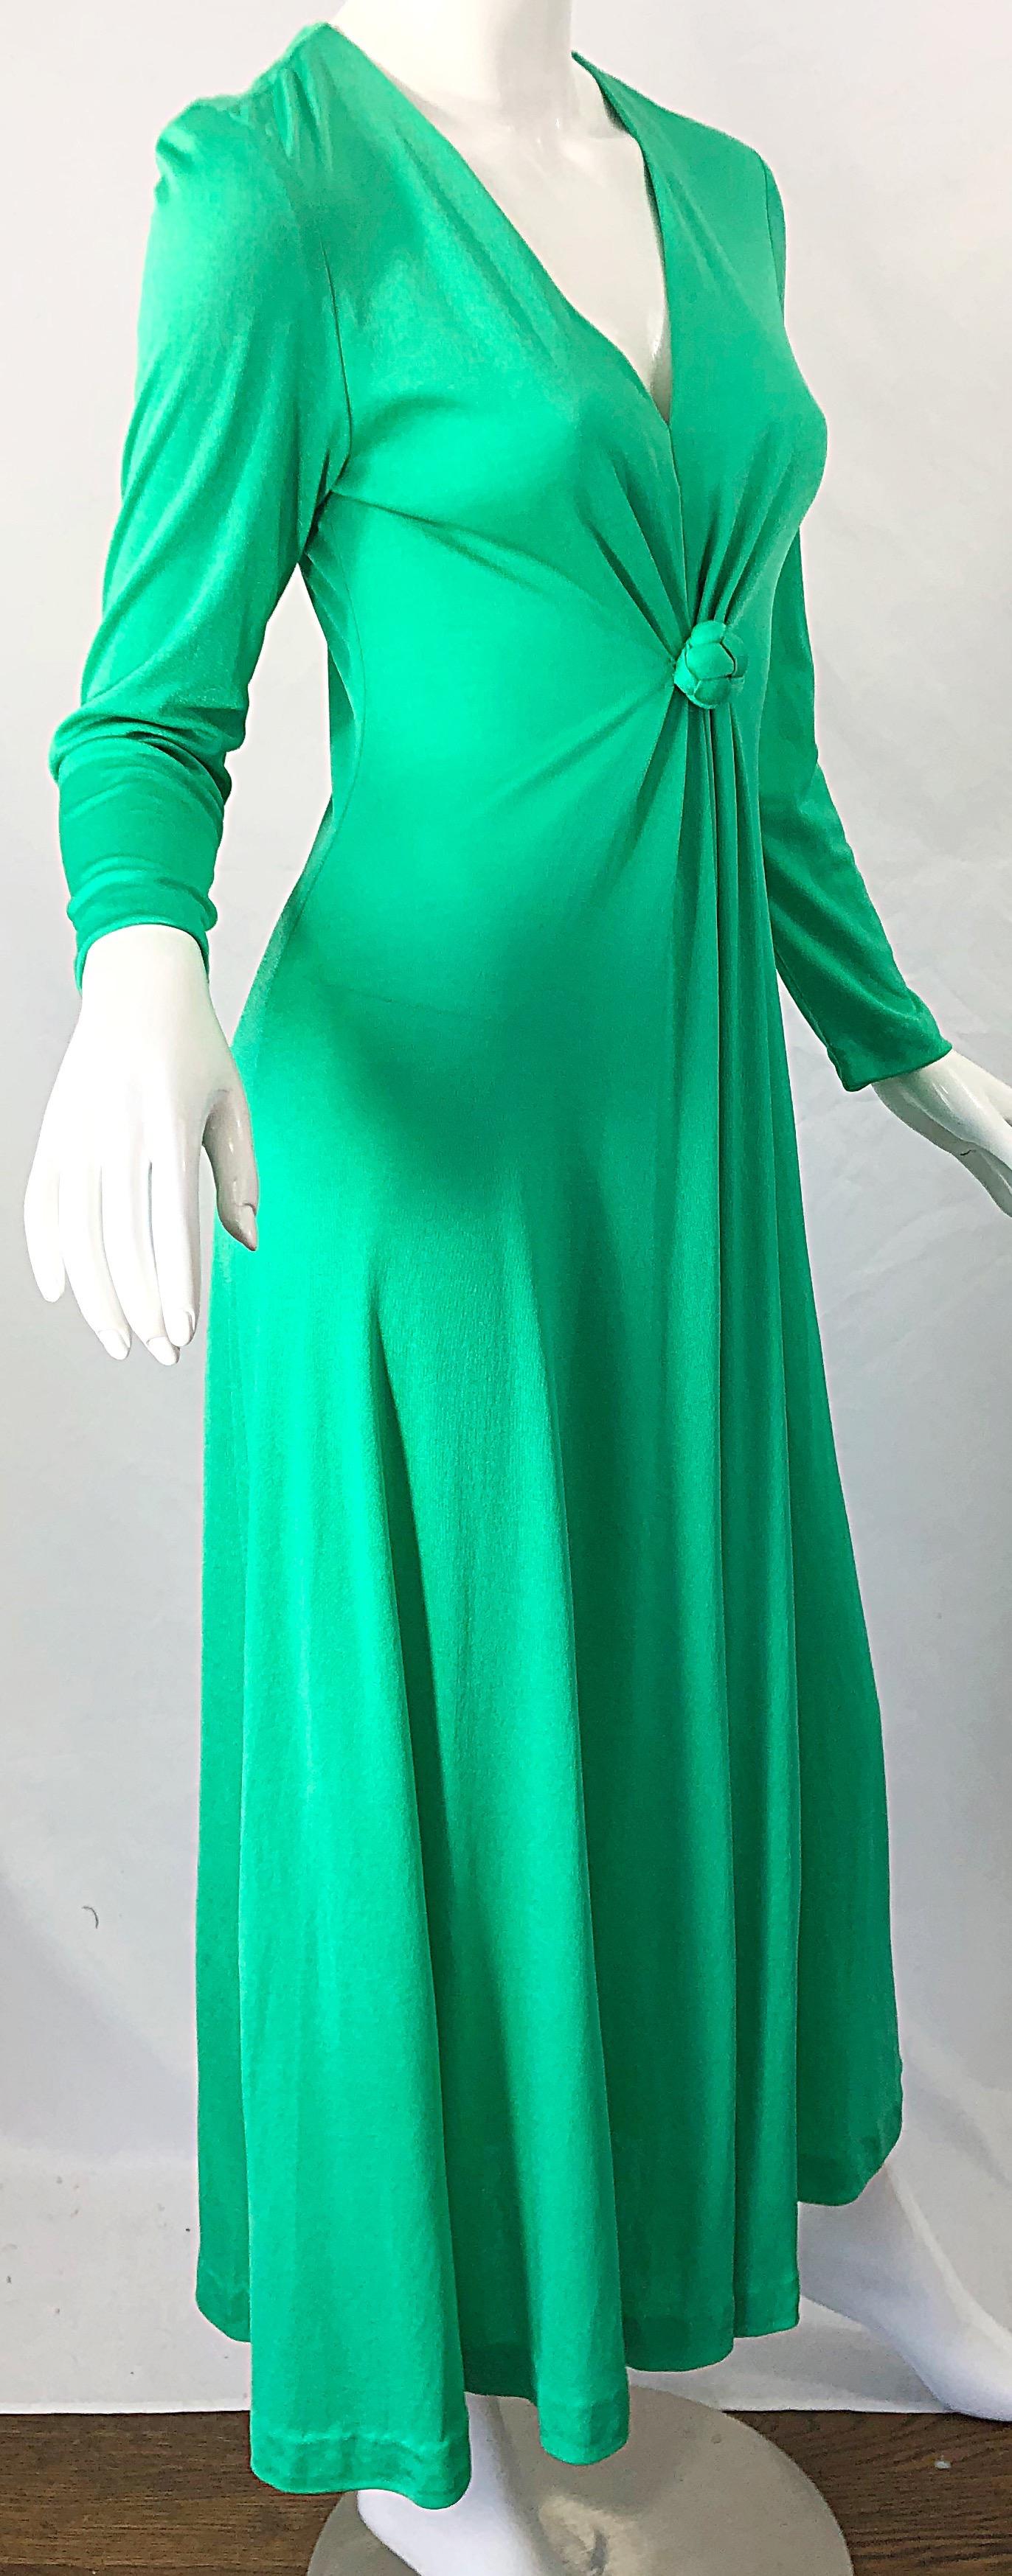 Women's 1970s Fredericks of Hollywood Kelly Green Vintage Jersey 70s Maxi Dress For Sale